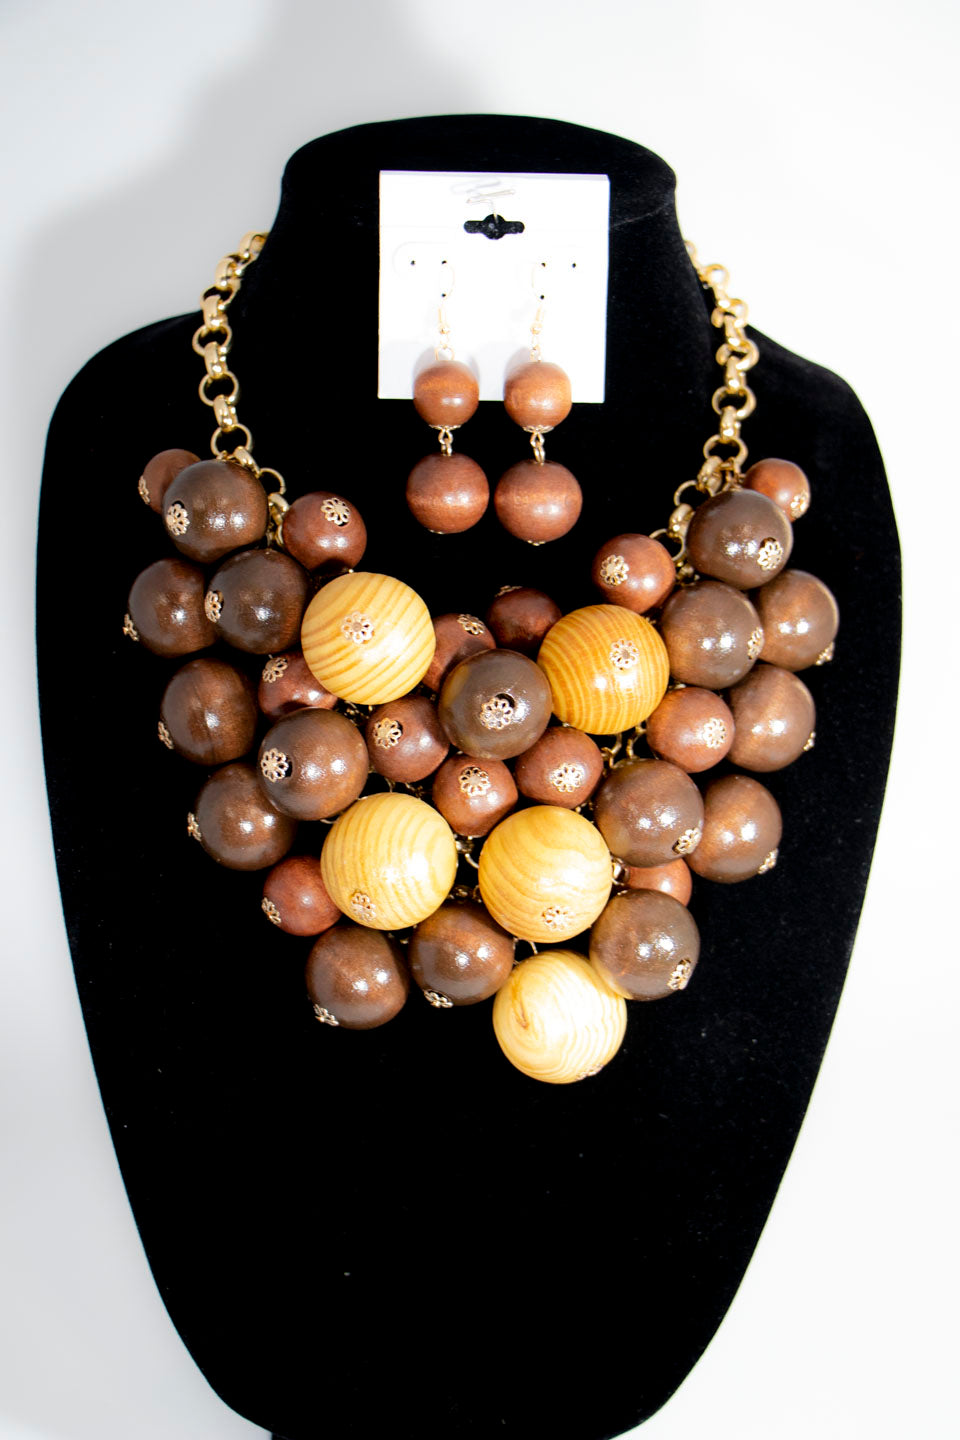 Buy Handmade Large Bead Necklace for Women, Chunky Beaded Necklace, Modern Wood  Bead Necklace, Statement Graduated Wooden Big Bead Necklace Online in India  - Etsy